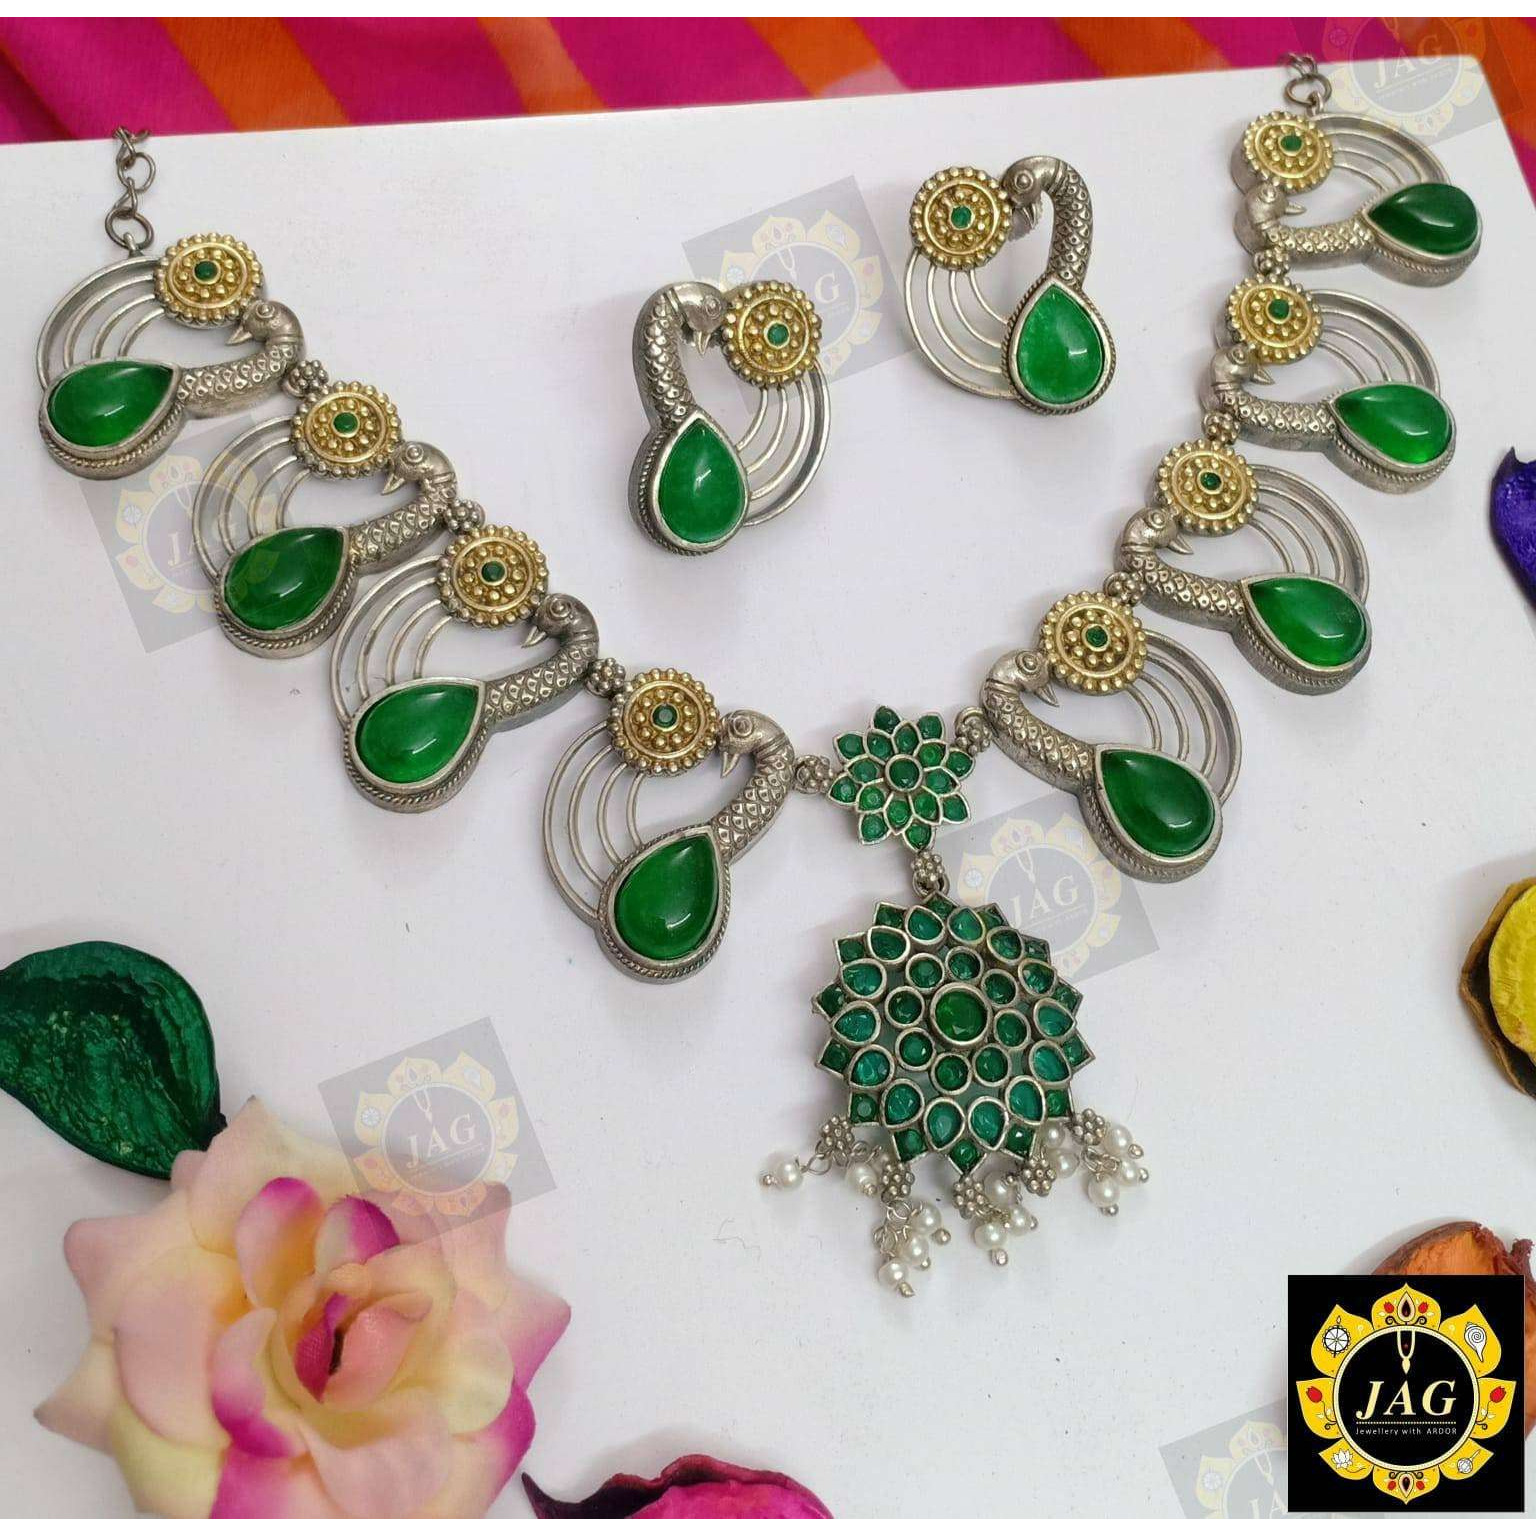 Infuse your beauty and charisma into your everyday life with this stunning dual Tone oxidized jewelry set, which includes a dual-tone long necklace, oxidized earrings, oxidized bangles, rings, and a nose pin combination. Make a fashion statement by wearing it with everything from a saree to a t-shirt and jeans. This oxidized jewelry is perfect for both day and night. Buy this Indian silver jewelry from Vastrabhushan today. You may buy it for yourself or even gift to someone you admire. Remember: